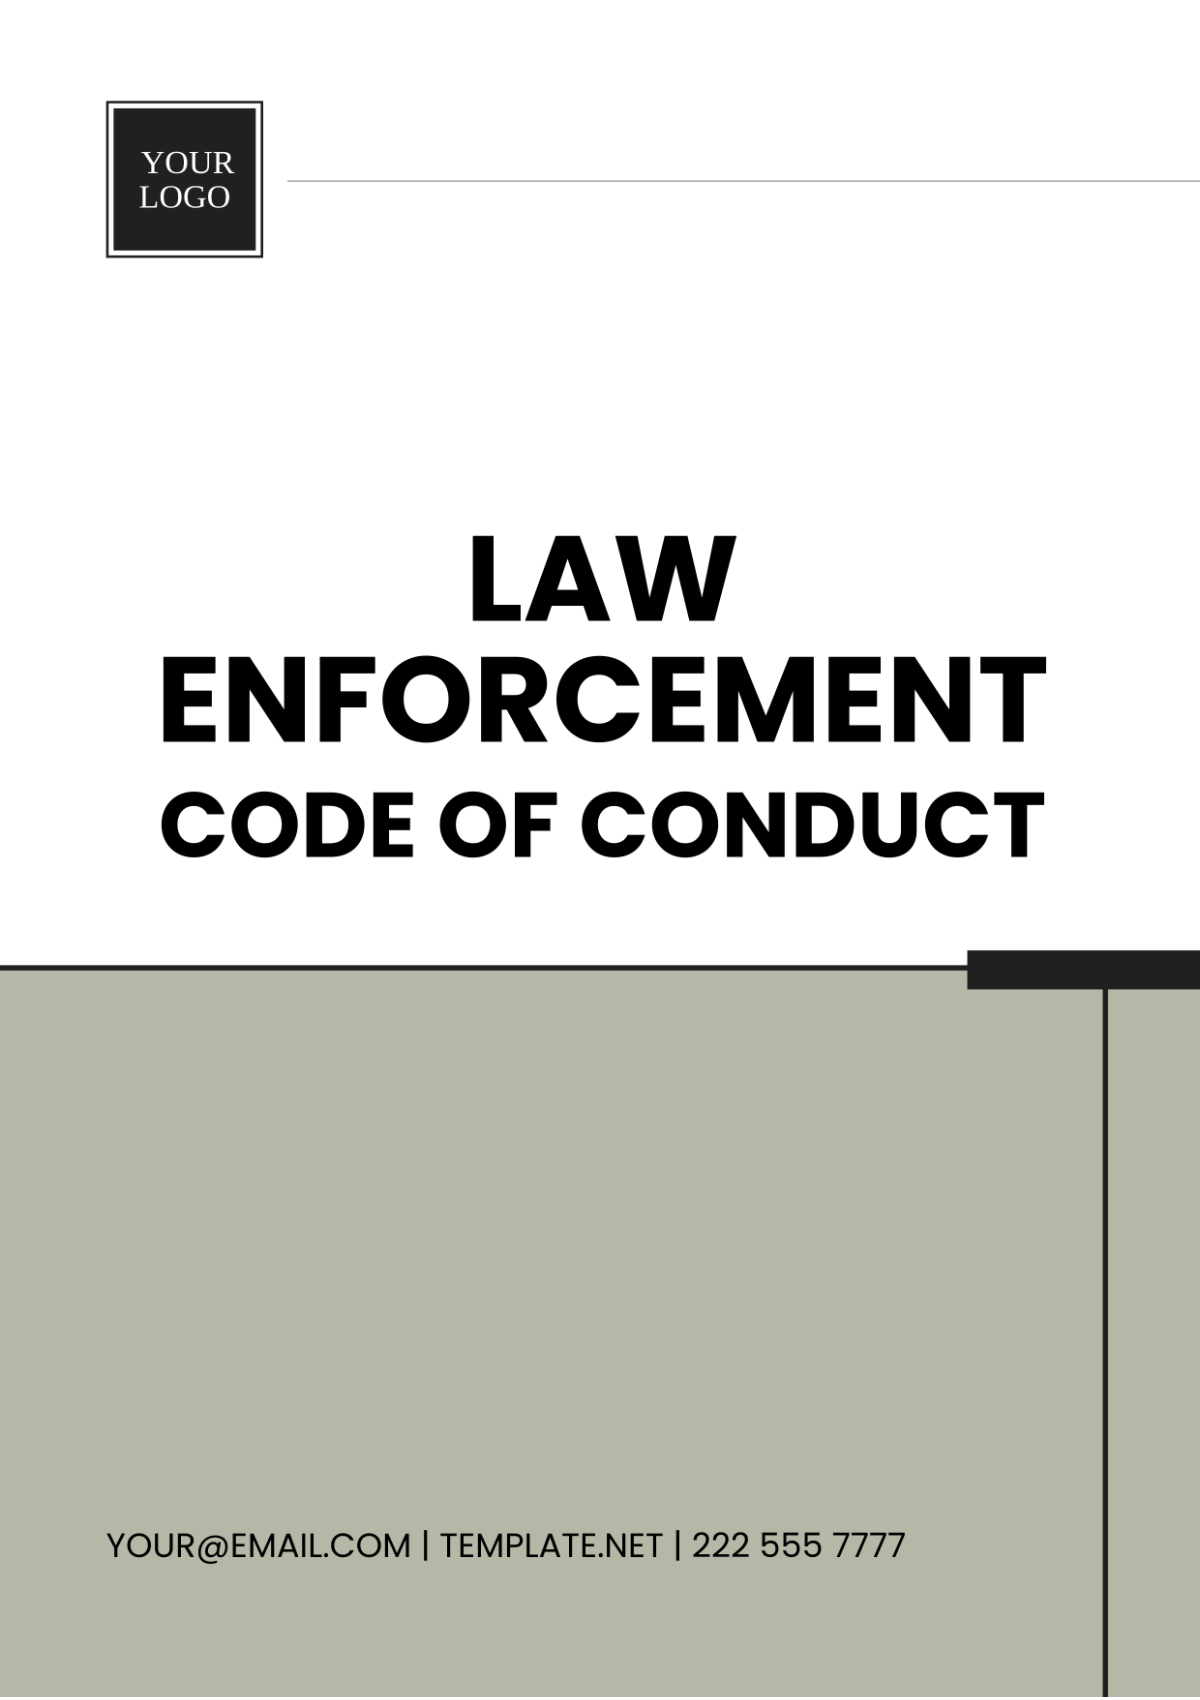 Free Law Enforcement Code of Conduct Template